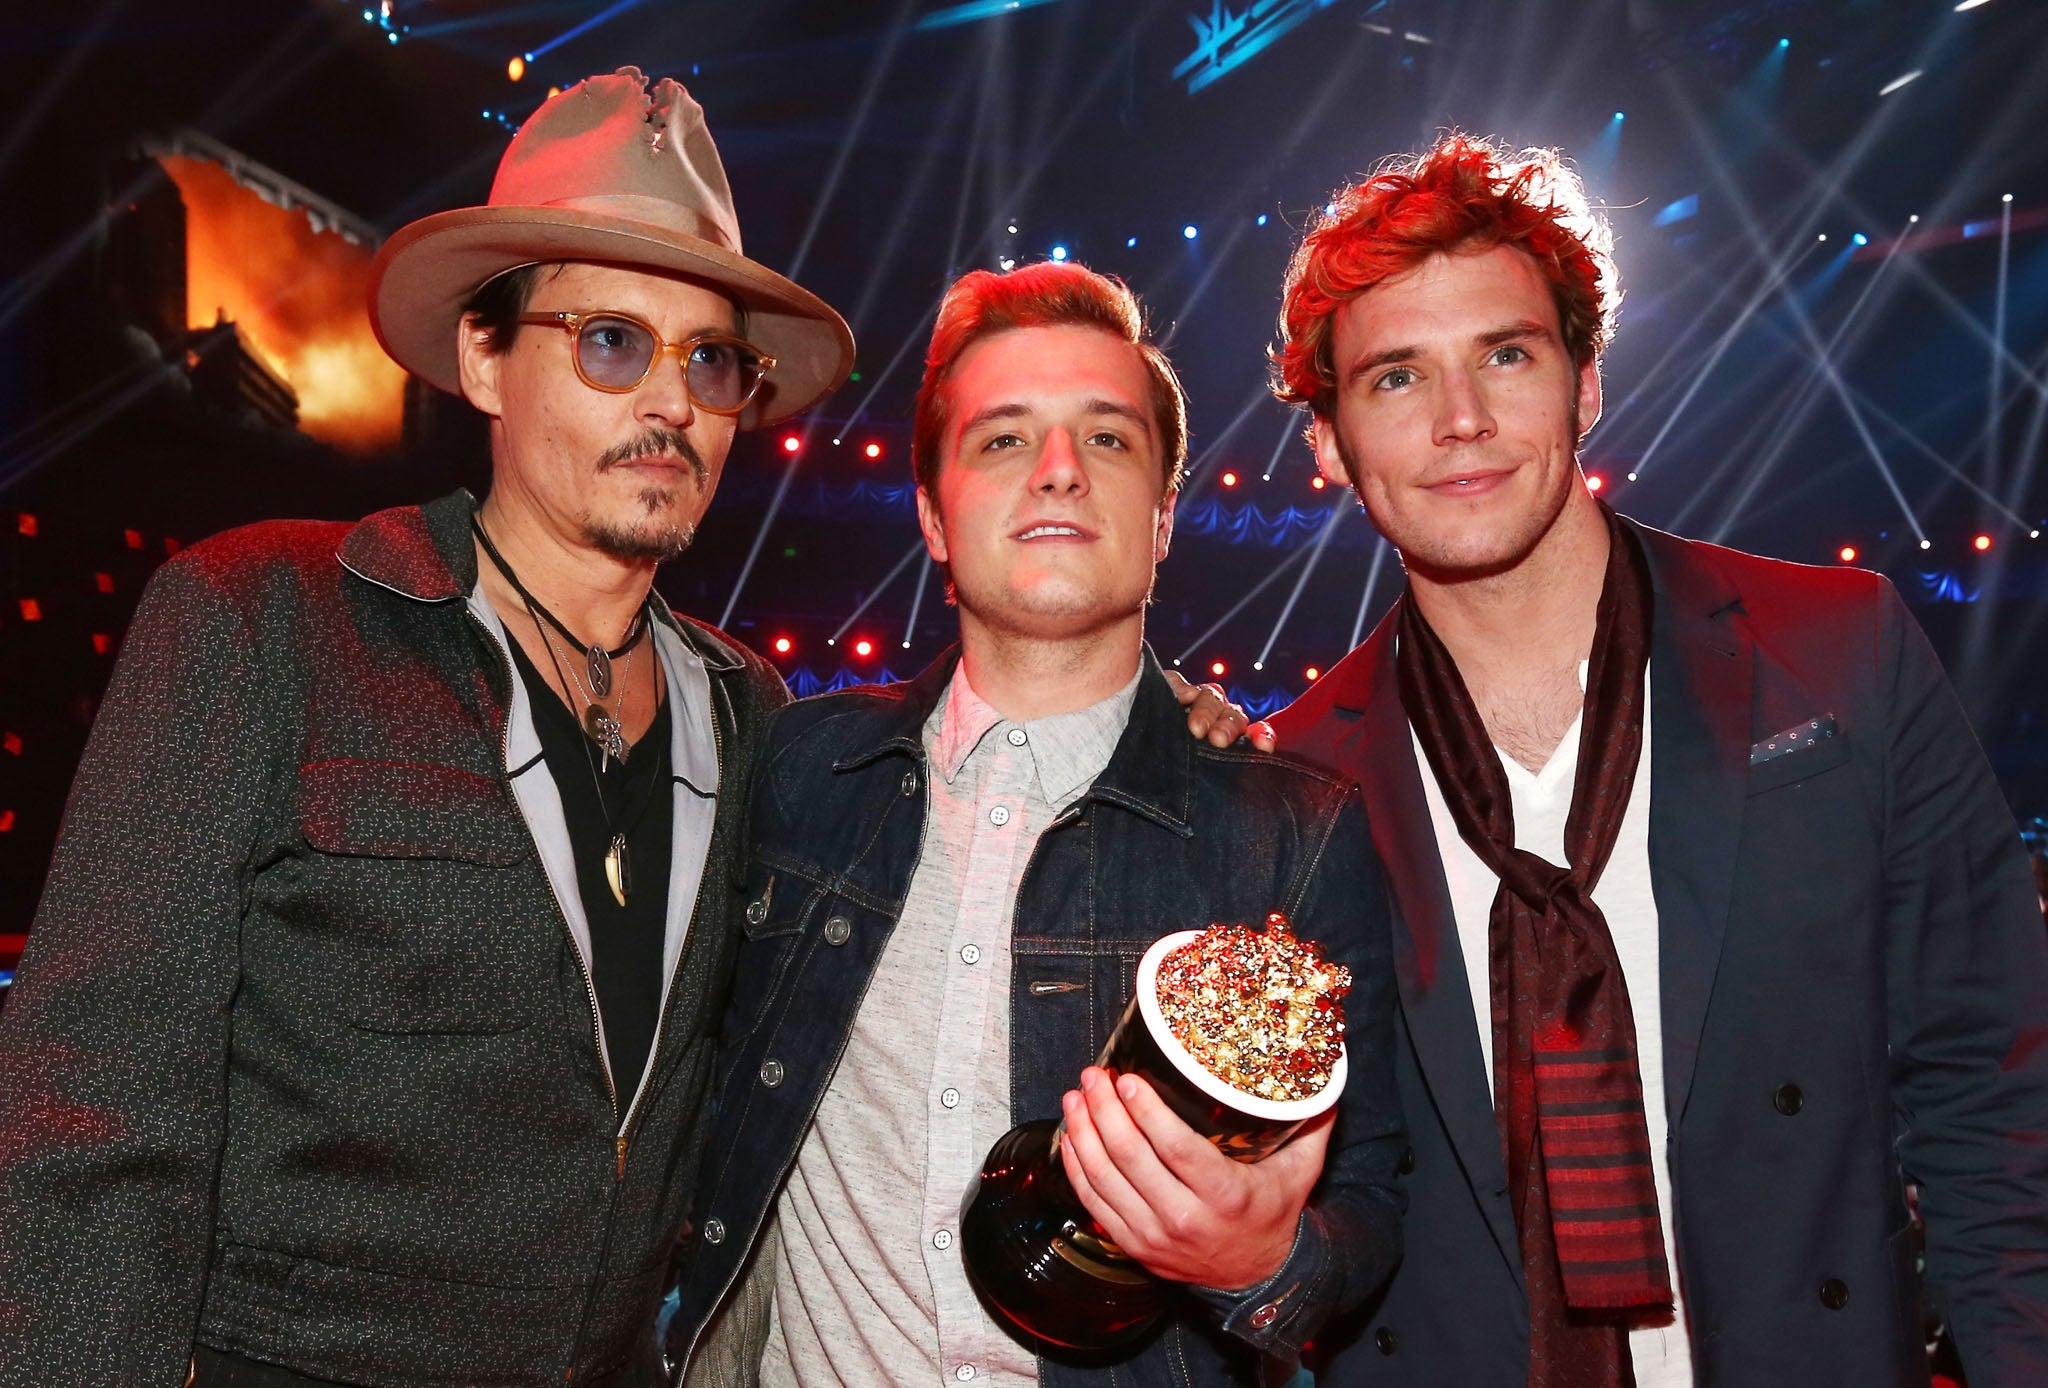 Johnny Depp (left) awards Josh Hutcherson for Best Male Performance for his role in the Hunger Games